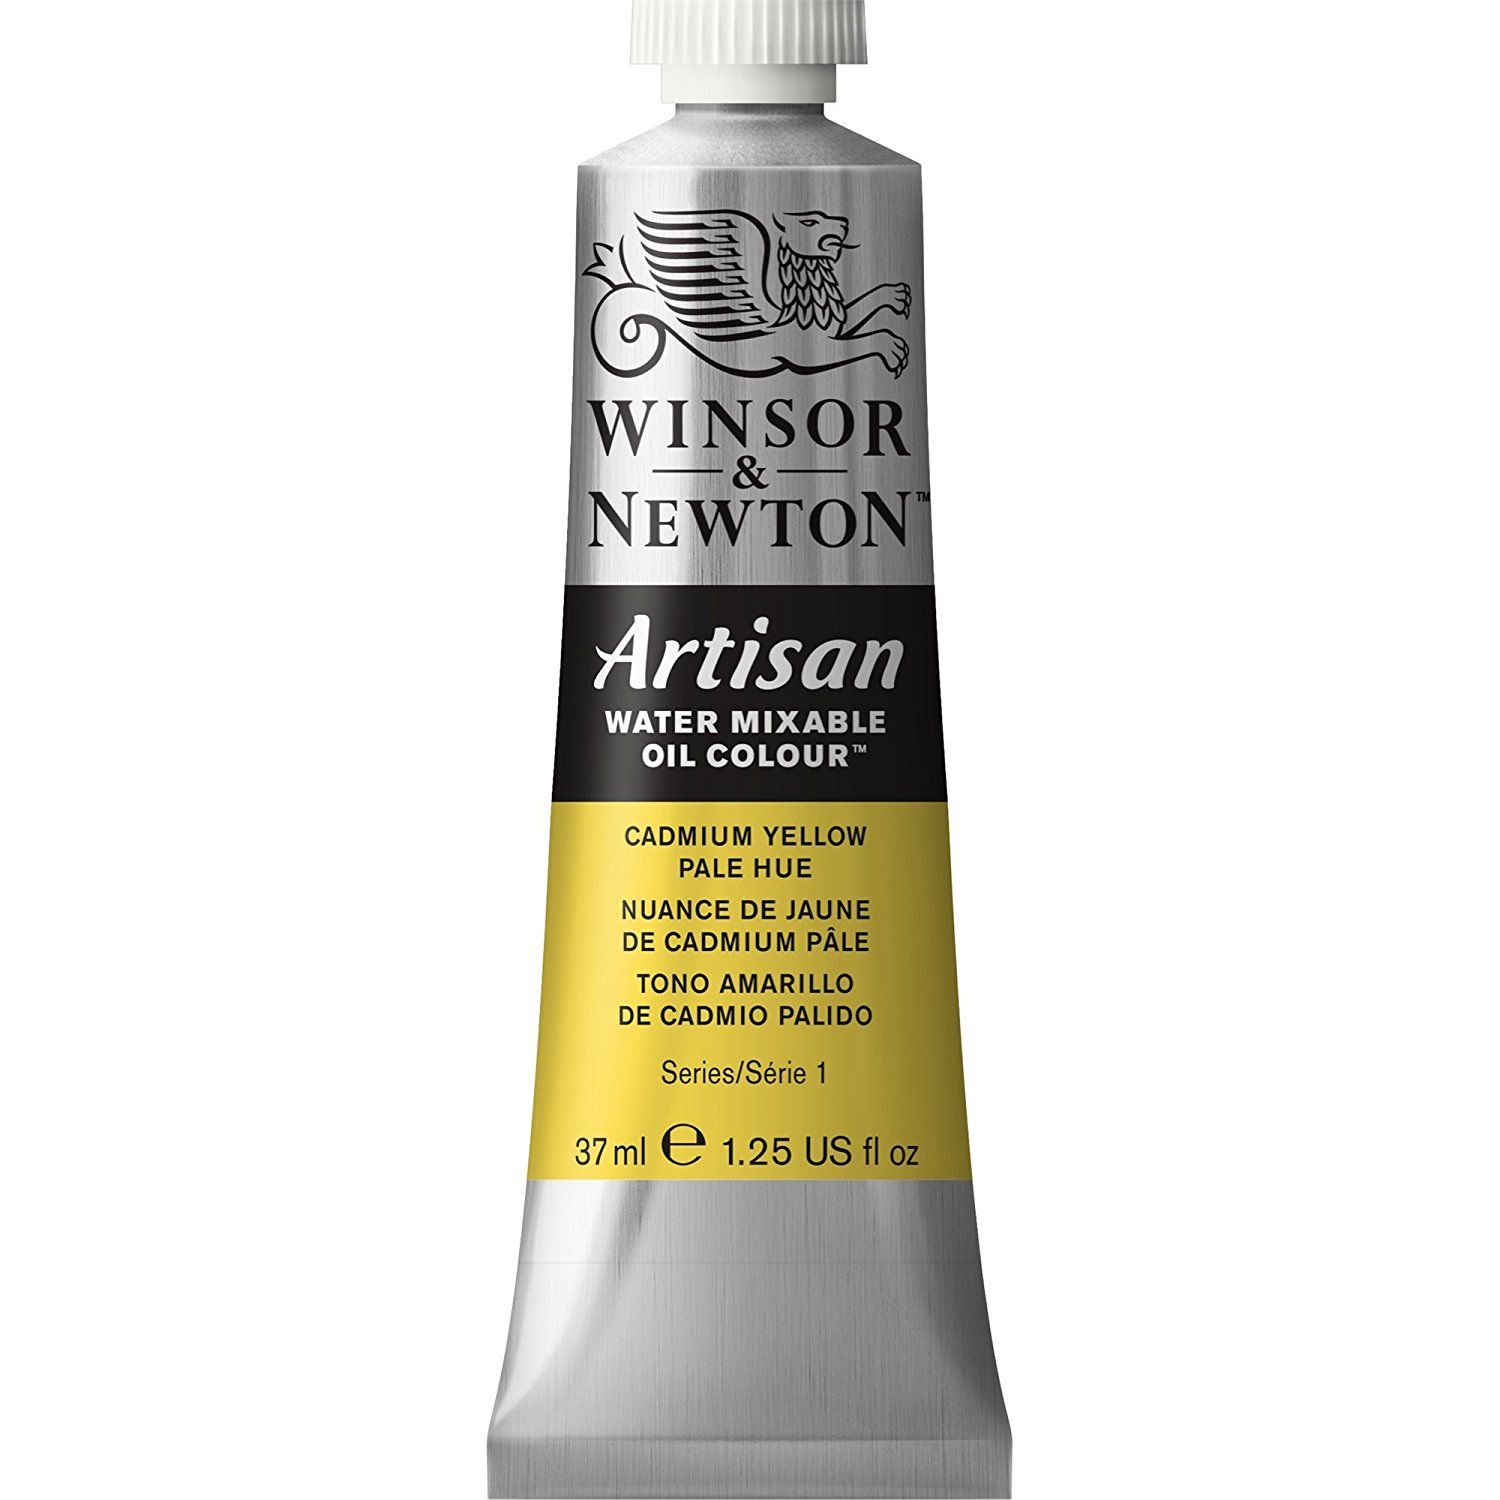 Artisan Water Mixable Oil - Cadmium Yellow Pale Hue 37ml